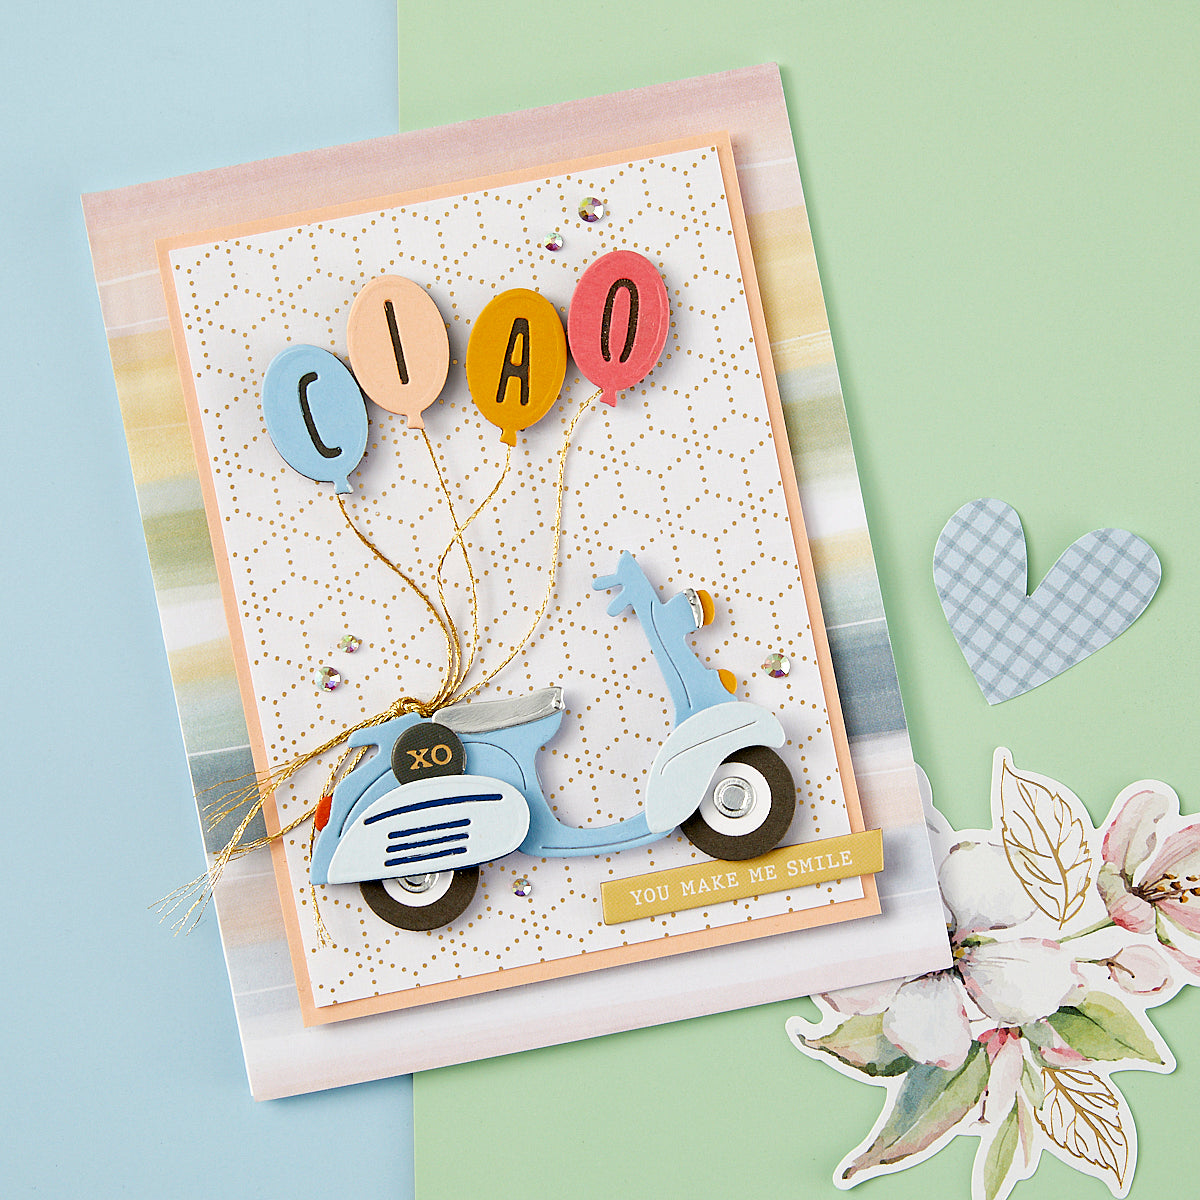 Spellbinders - Ciao Etched Dies from the Heartfelt Collection